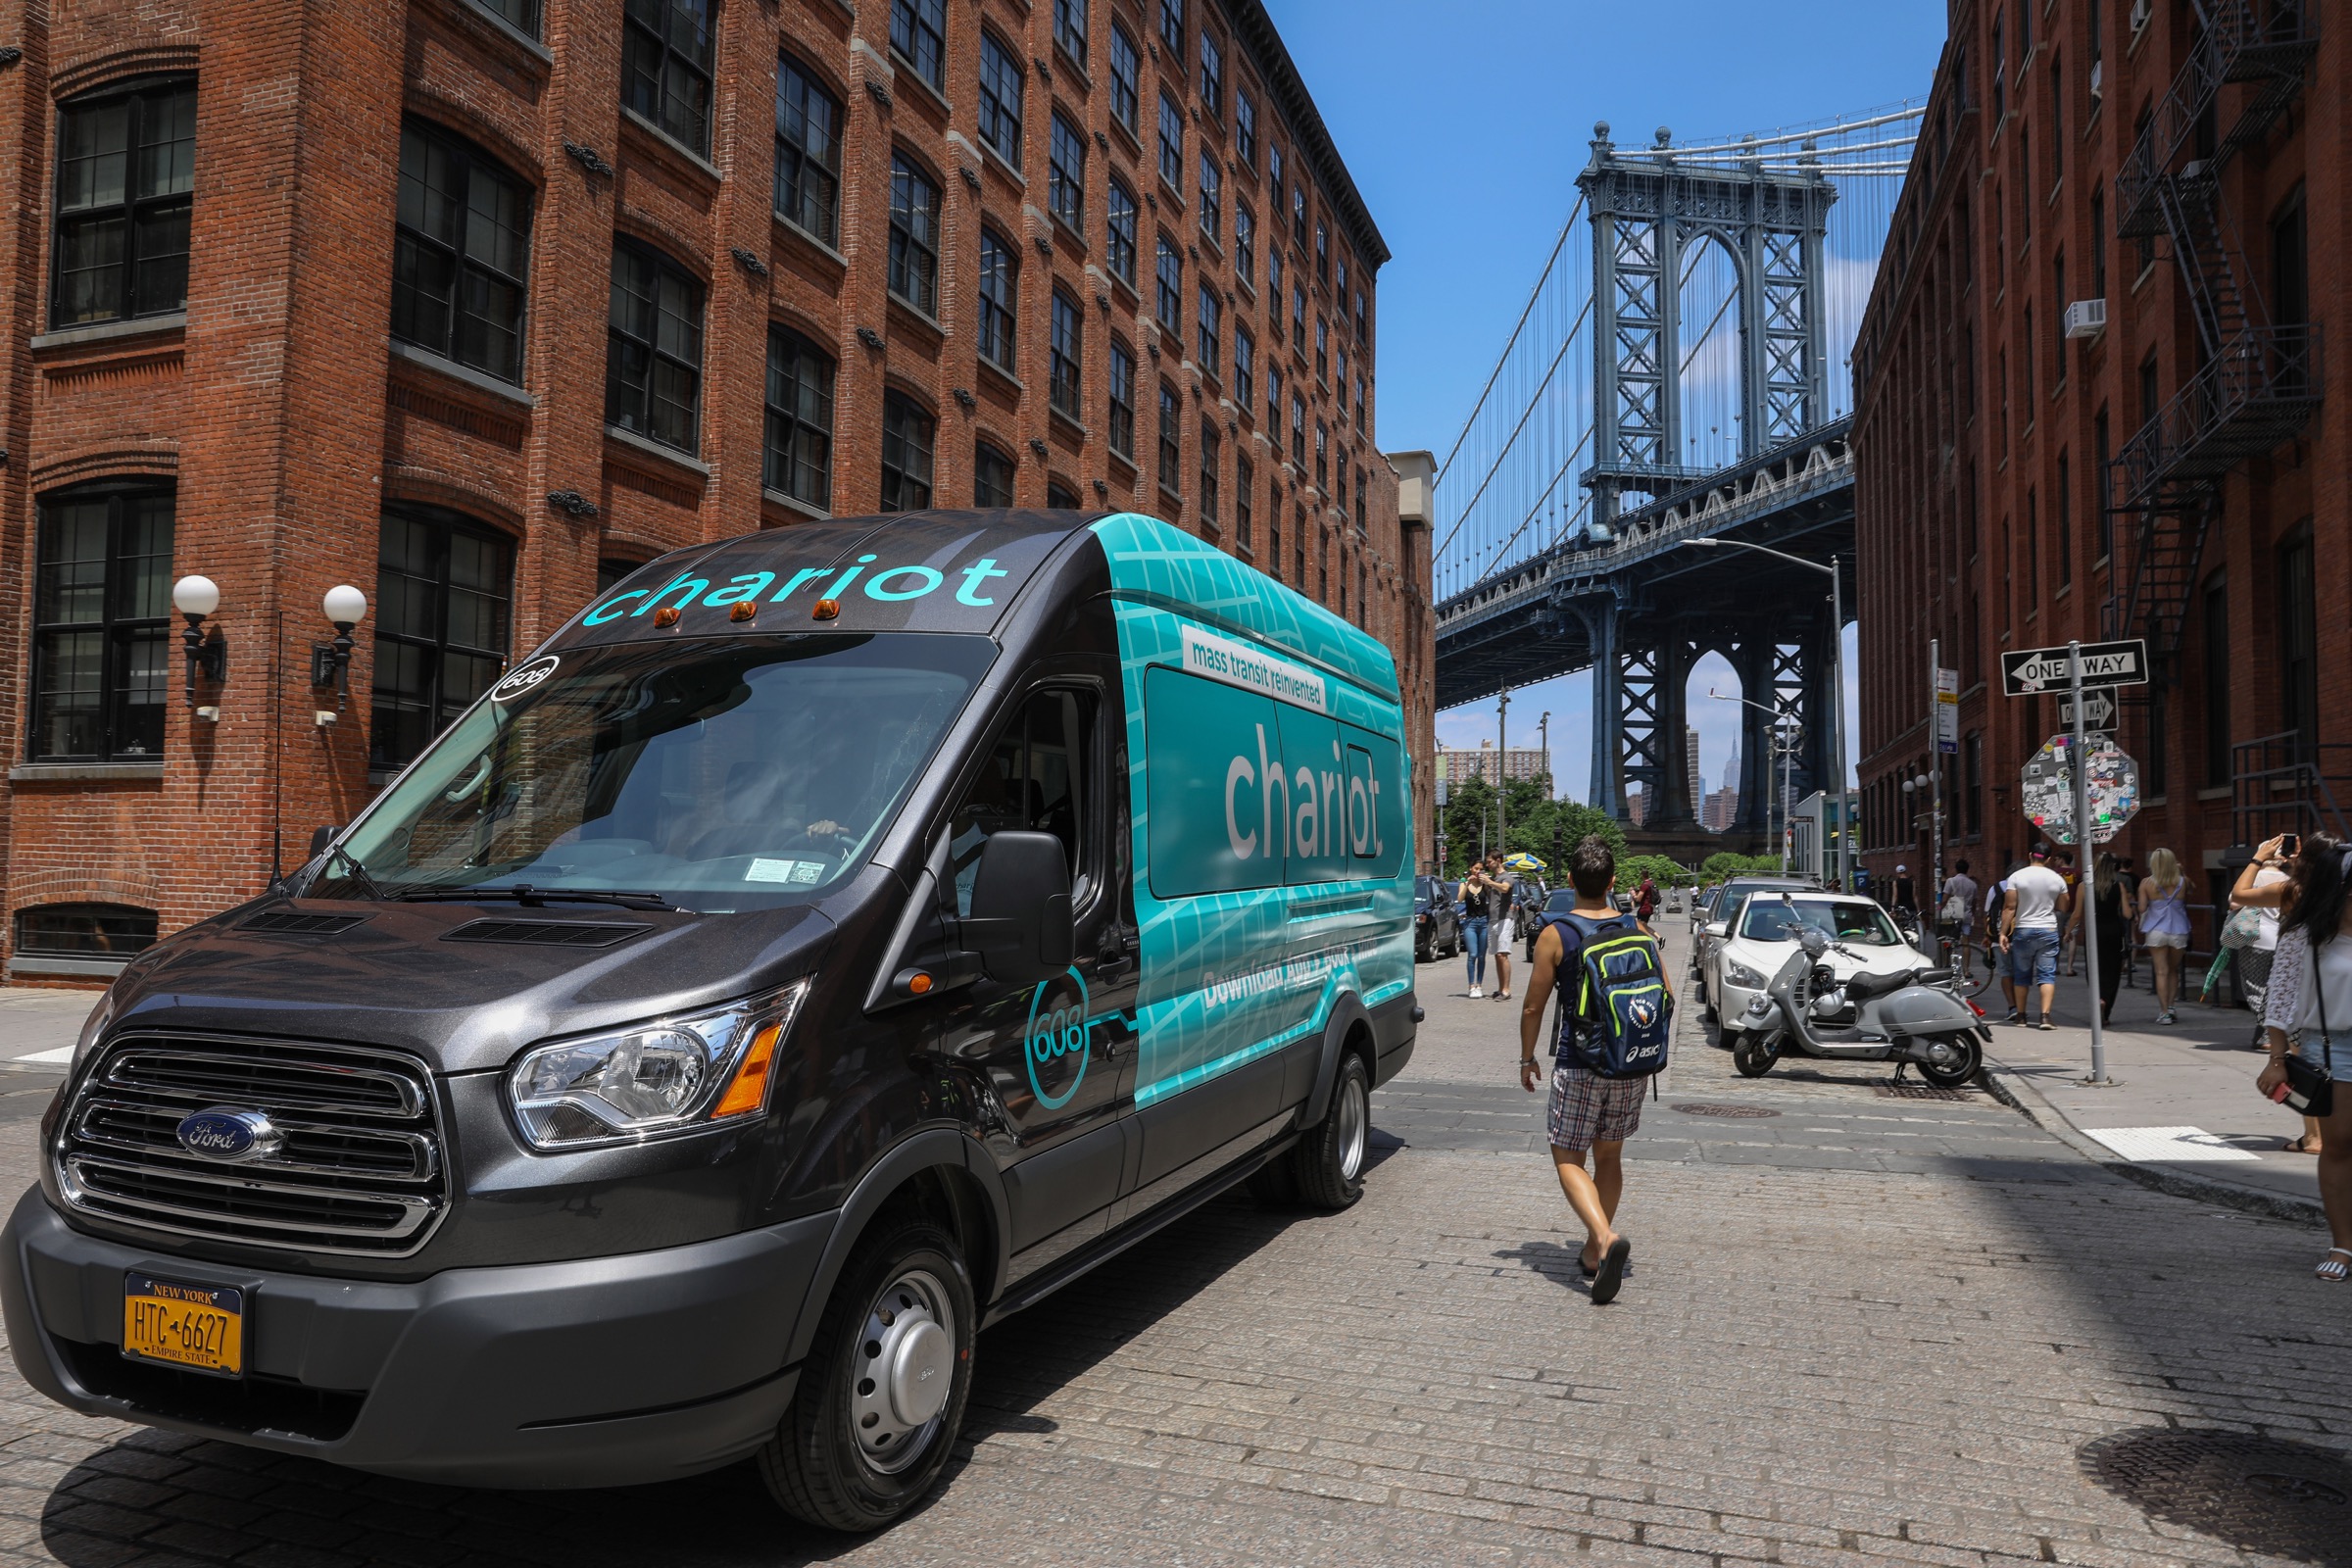 Ford’s Chariot shuttles are expanding to New York City